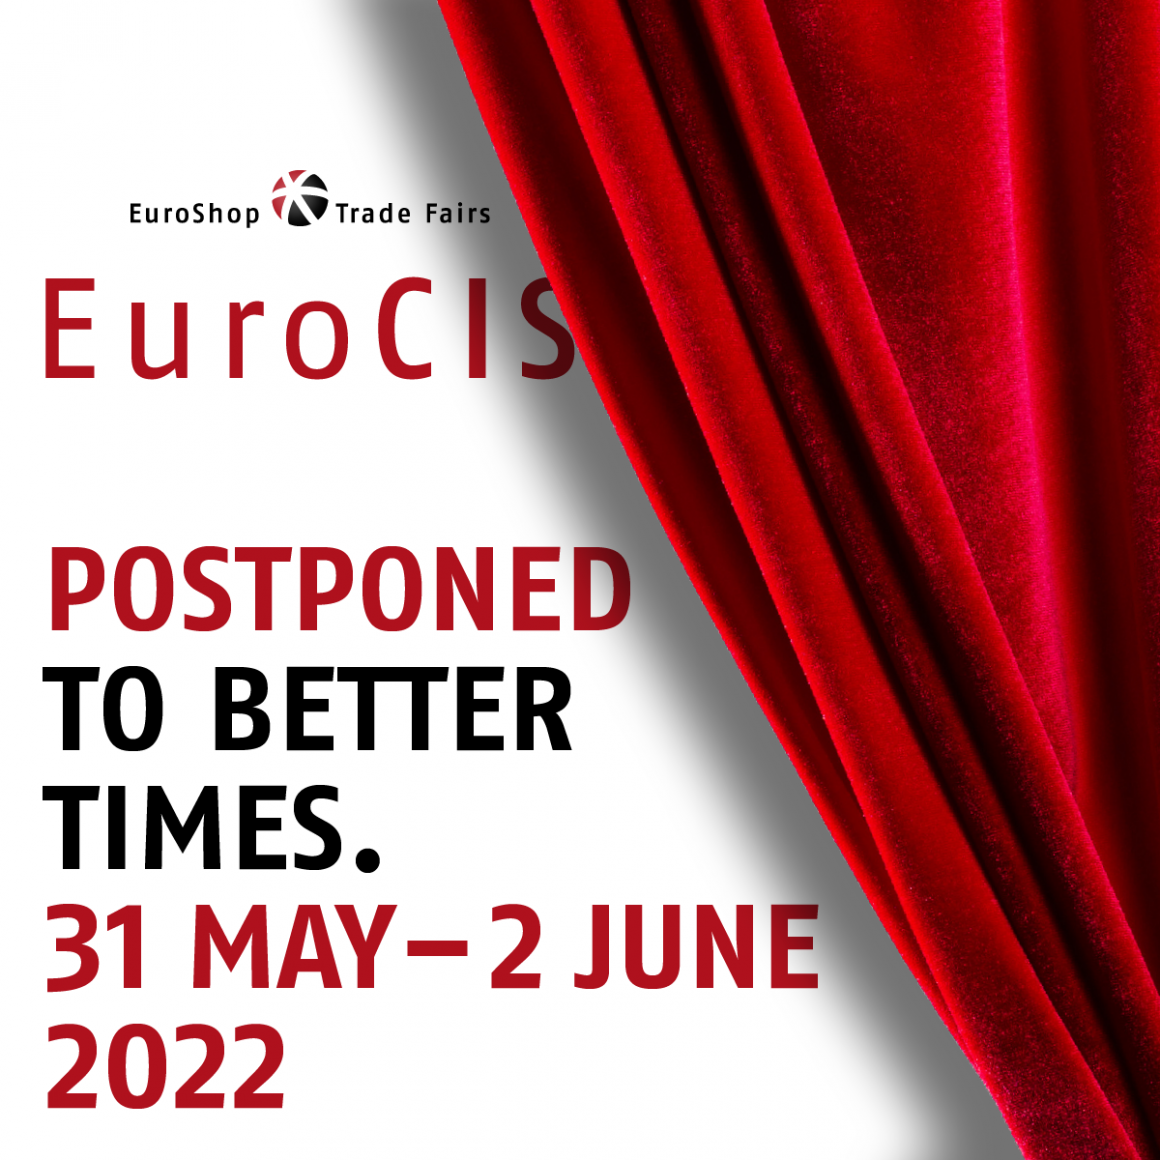 Note that EuroCIS 2022 will be postponed to 31 Mai to 2 Juni 2022...